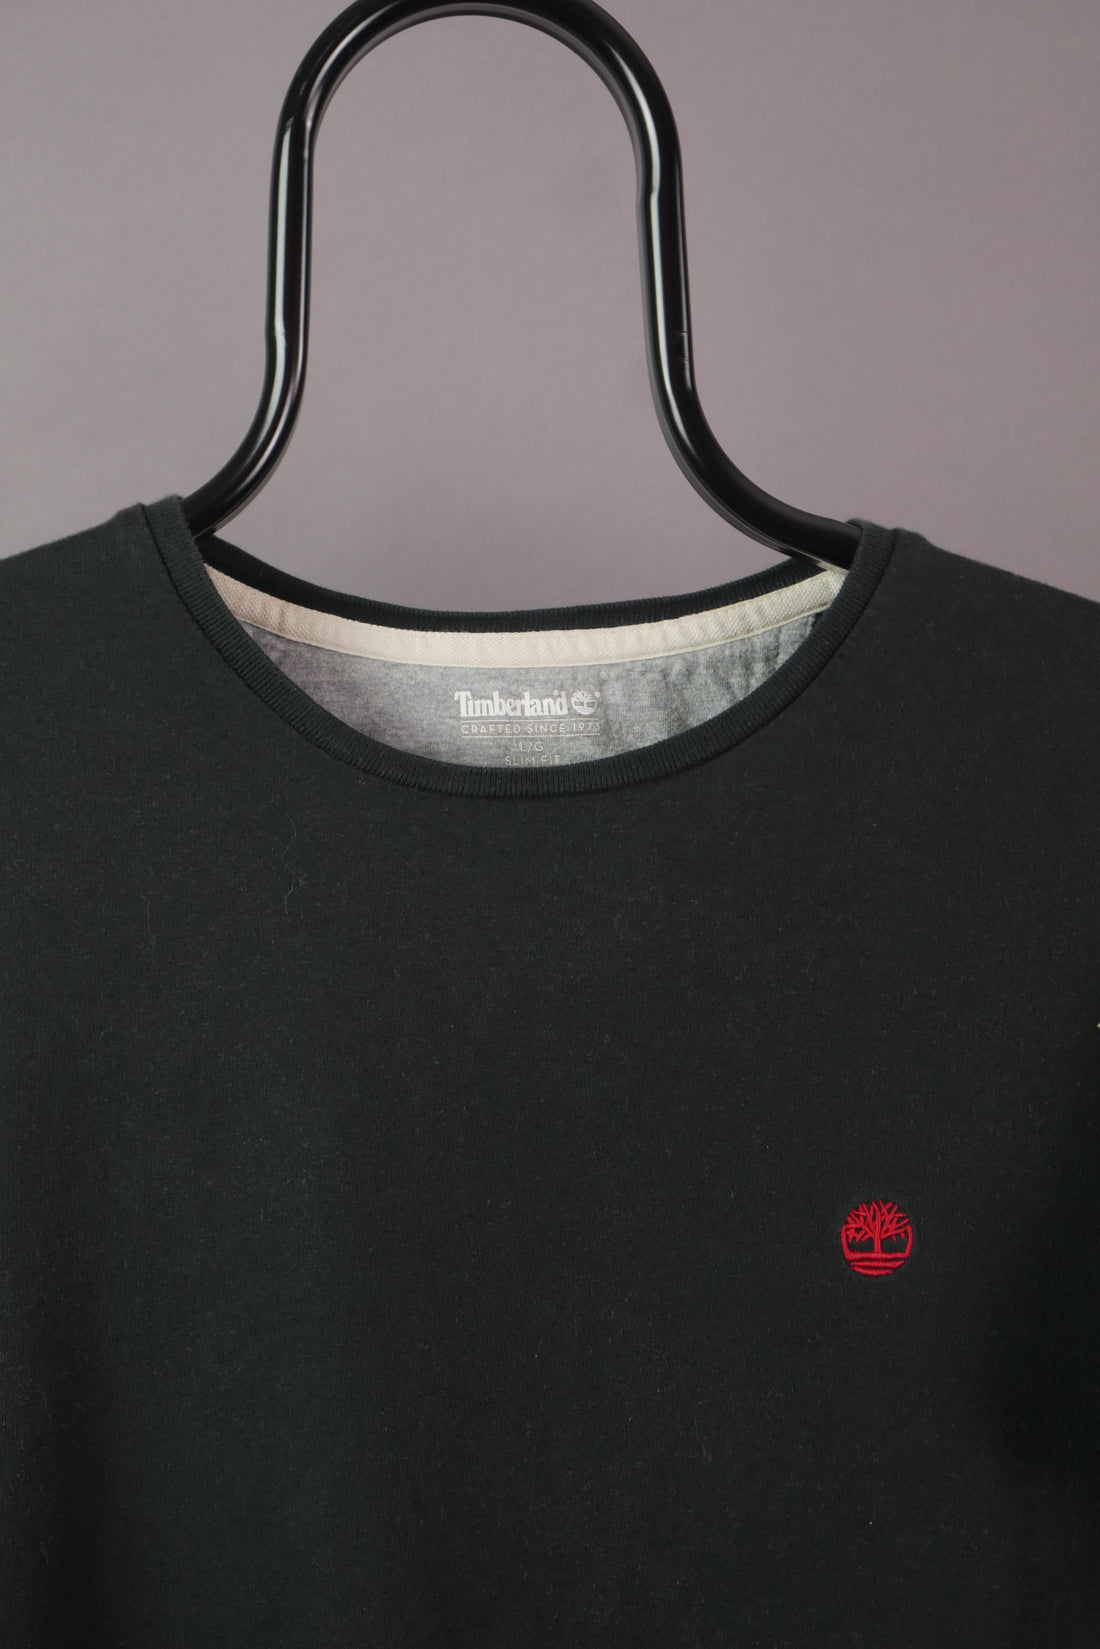 The Timberland Embroidered Logo T-shirt (L)